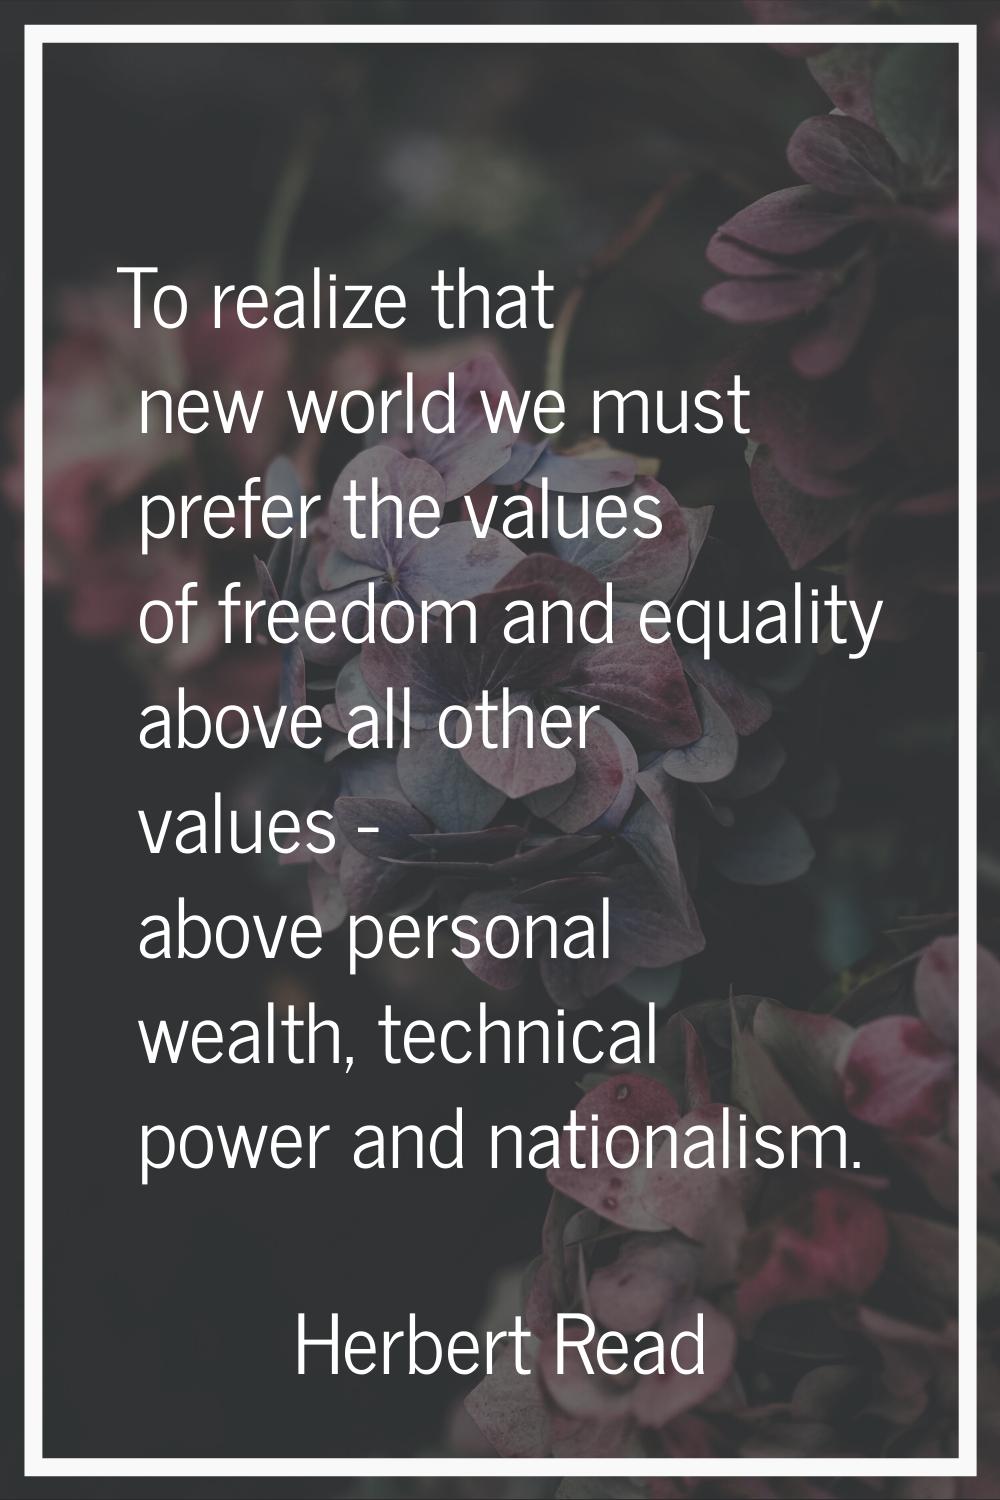 To realize that new world we must prefer the values of freedom and equality above all other values 